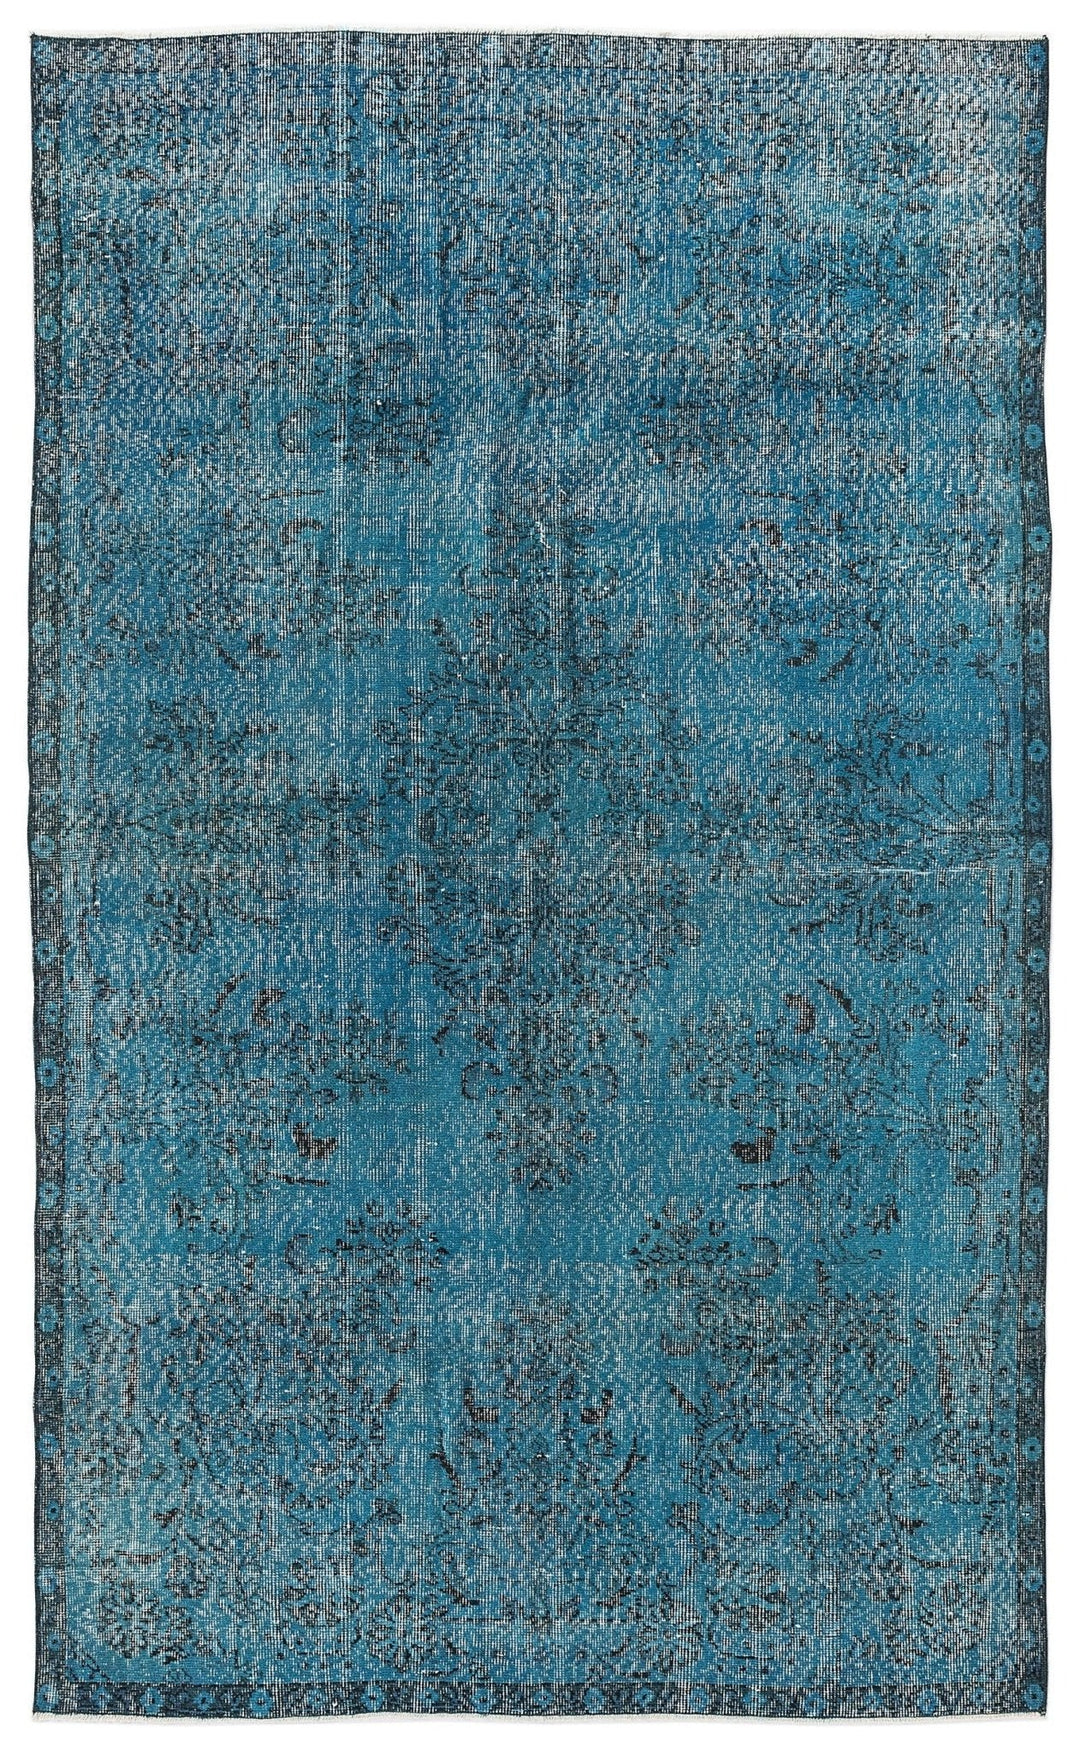 Athens 8033 Turquoise Tumbled Wool Hand Woven Rug 180 x 300